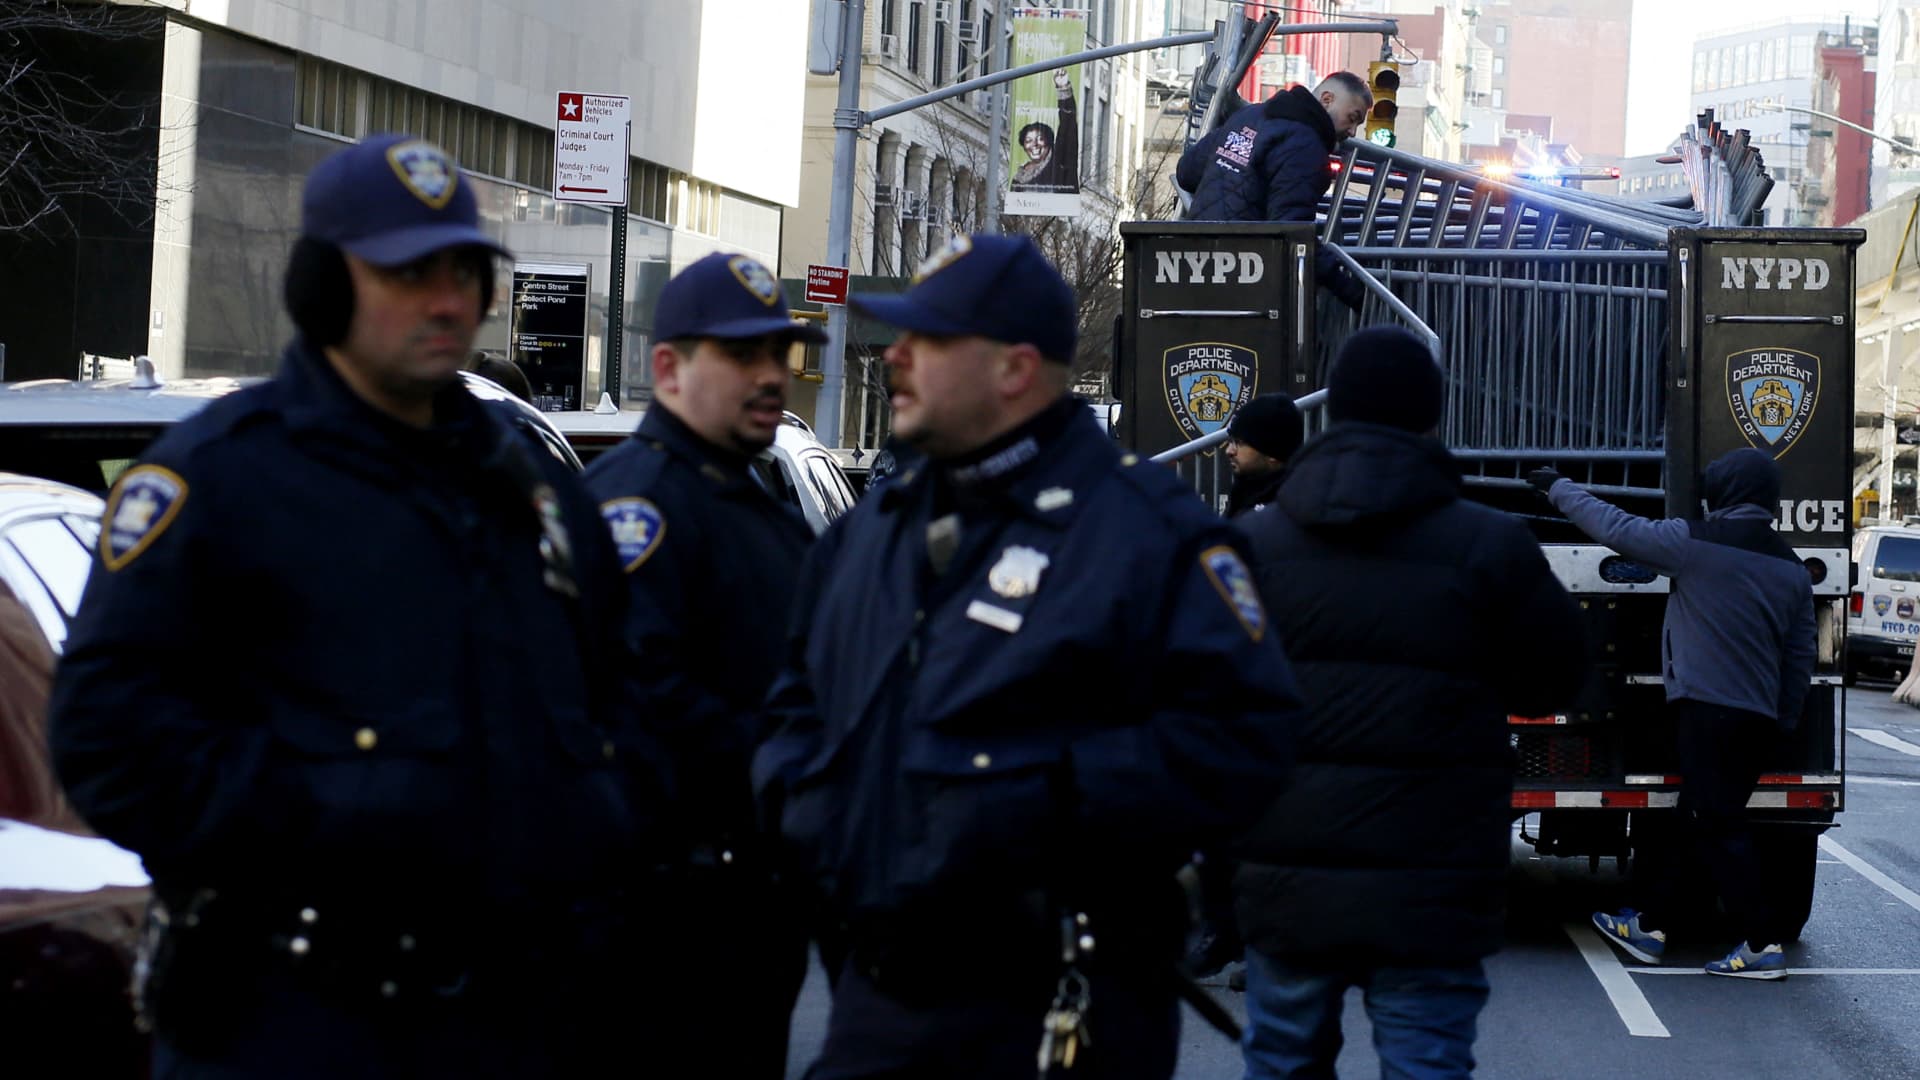 Officers with the New York Police Department set up barricades outside the Manhattan District Attorney's office in New York City on March 20, 2023.